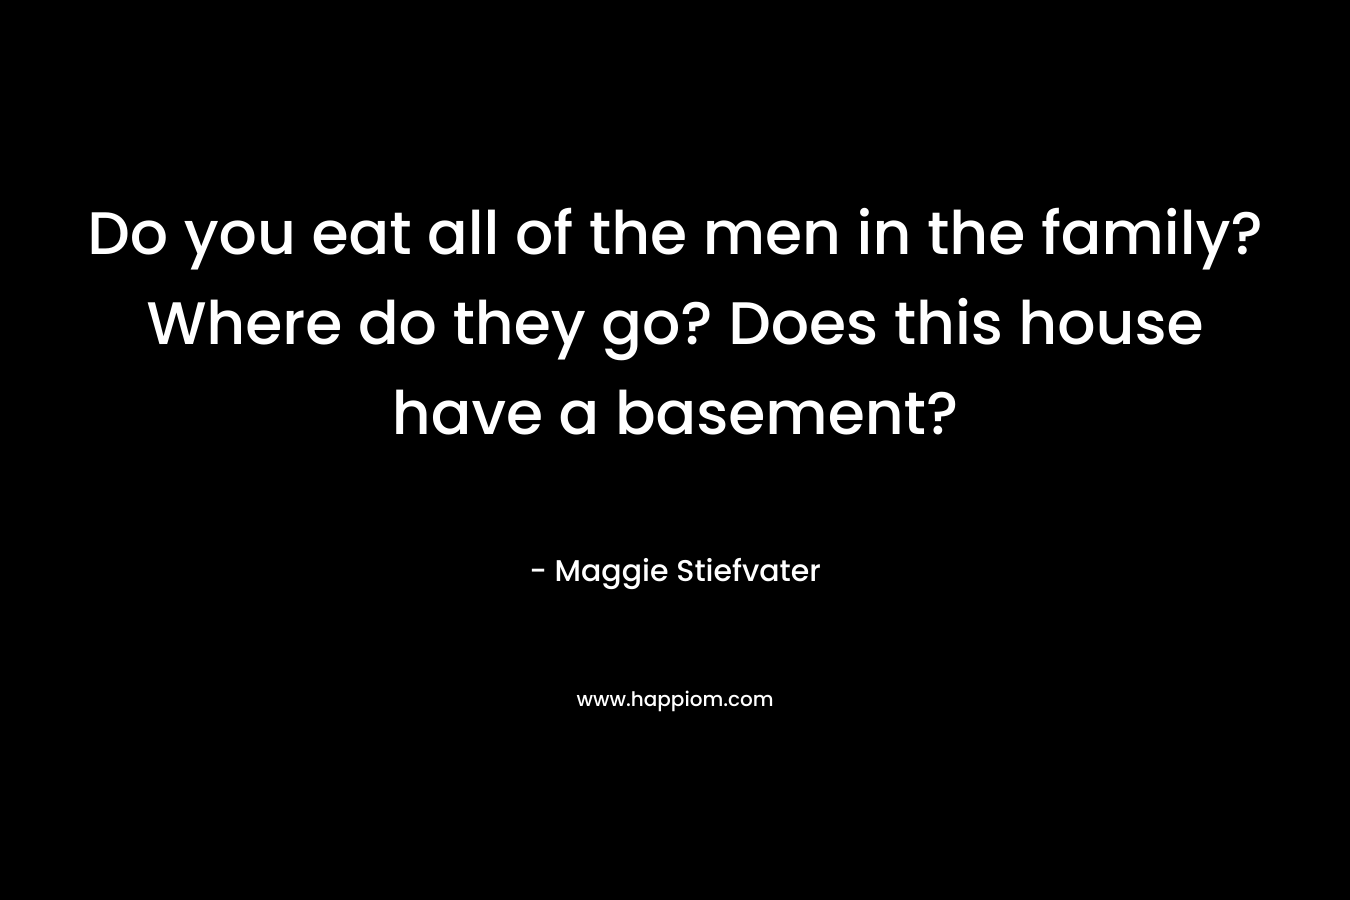 Do you eat all of the men in the family? Where do they go? Does this house have a basement? – Maggie Stiefvater